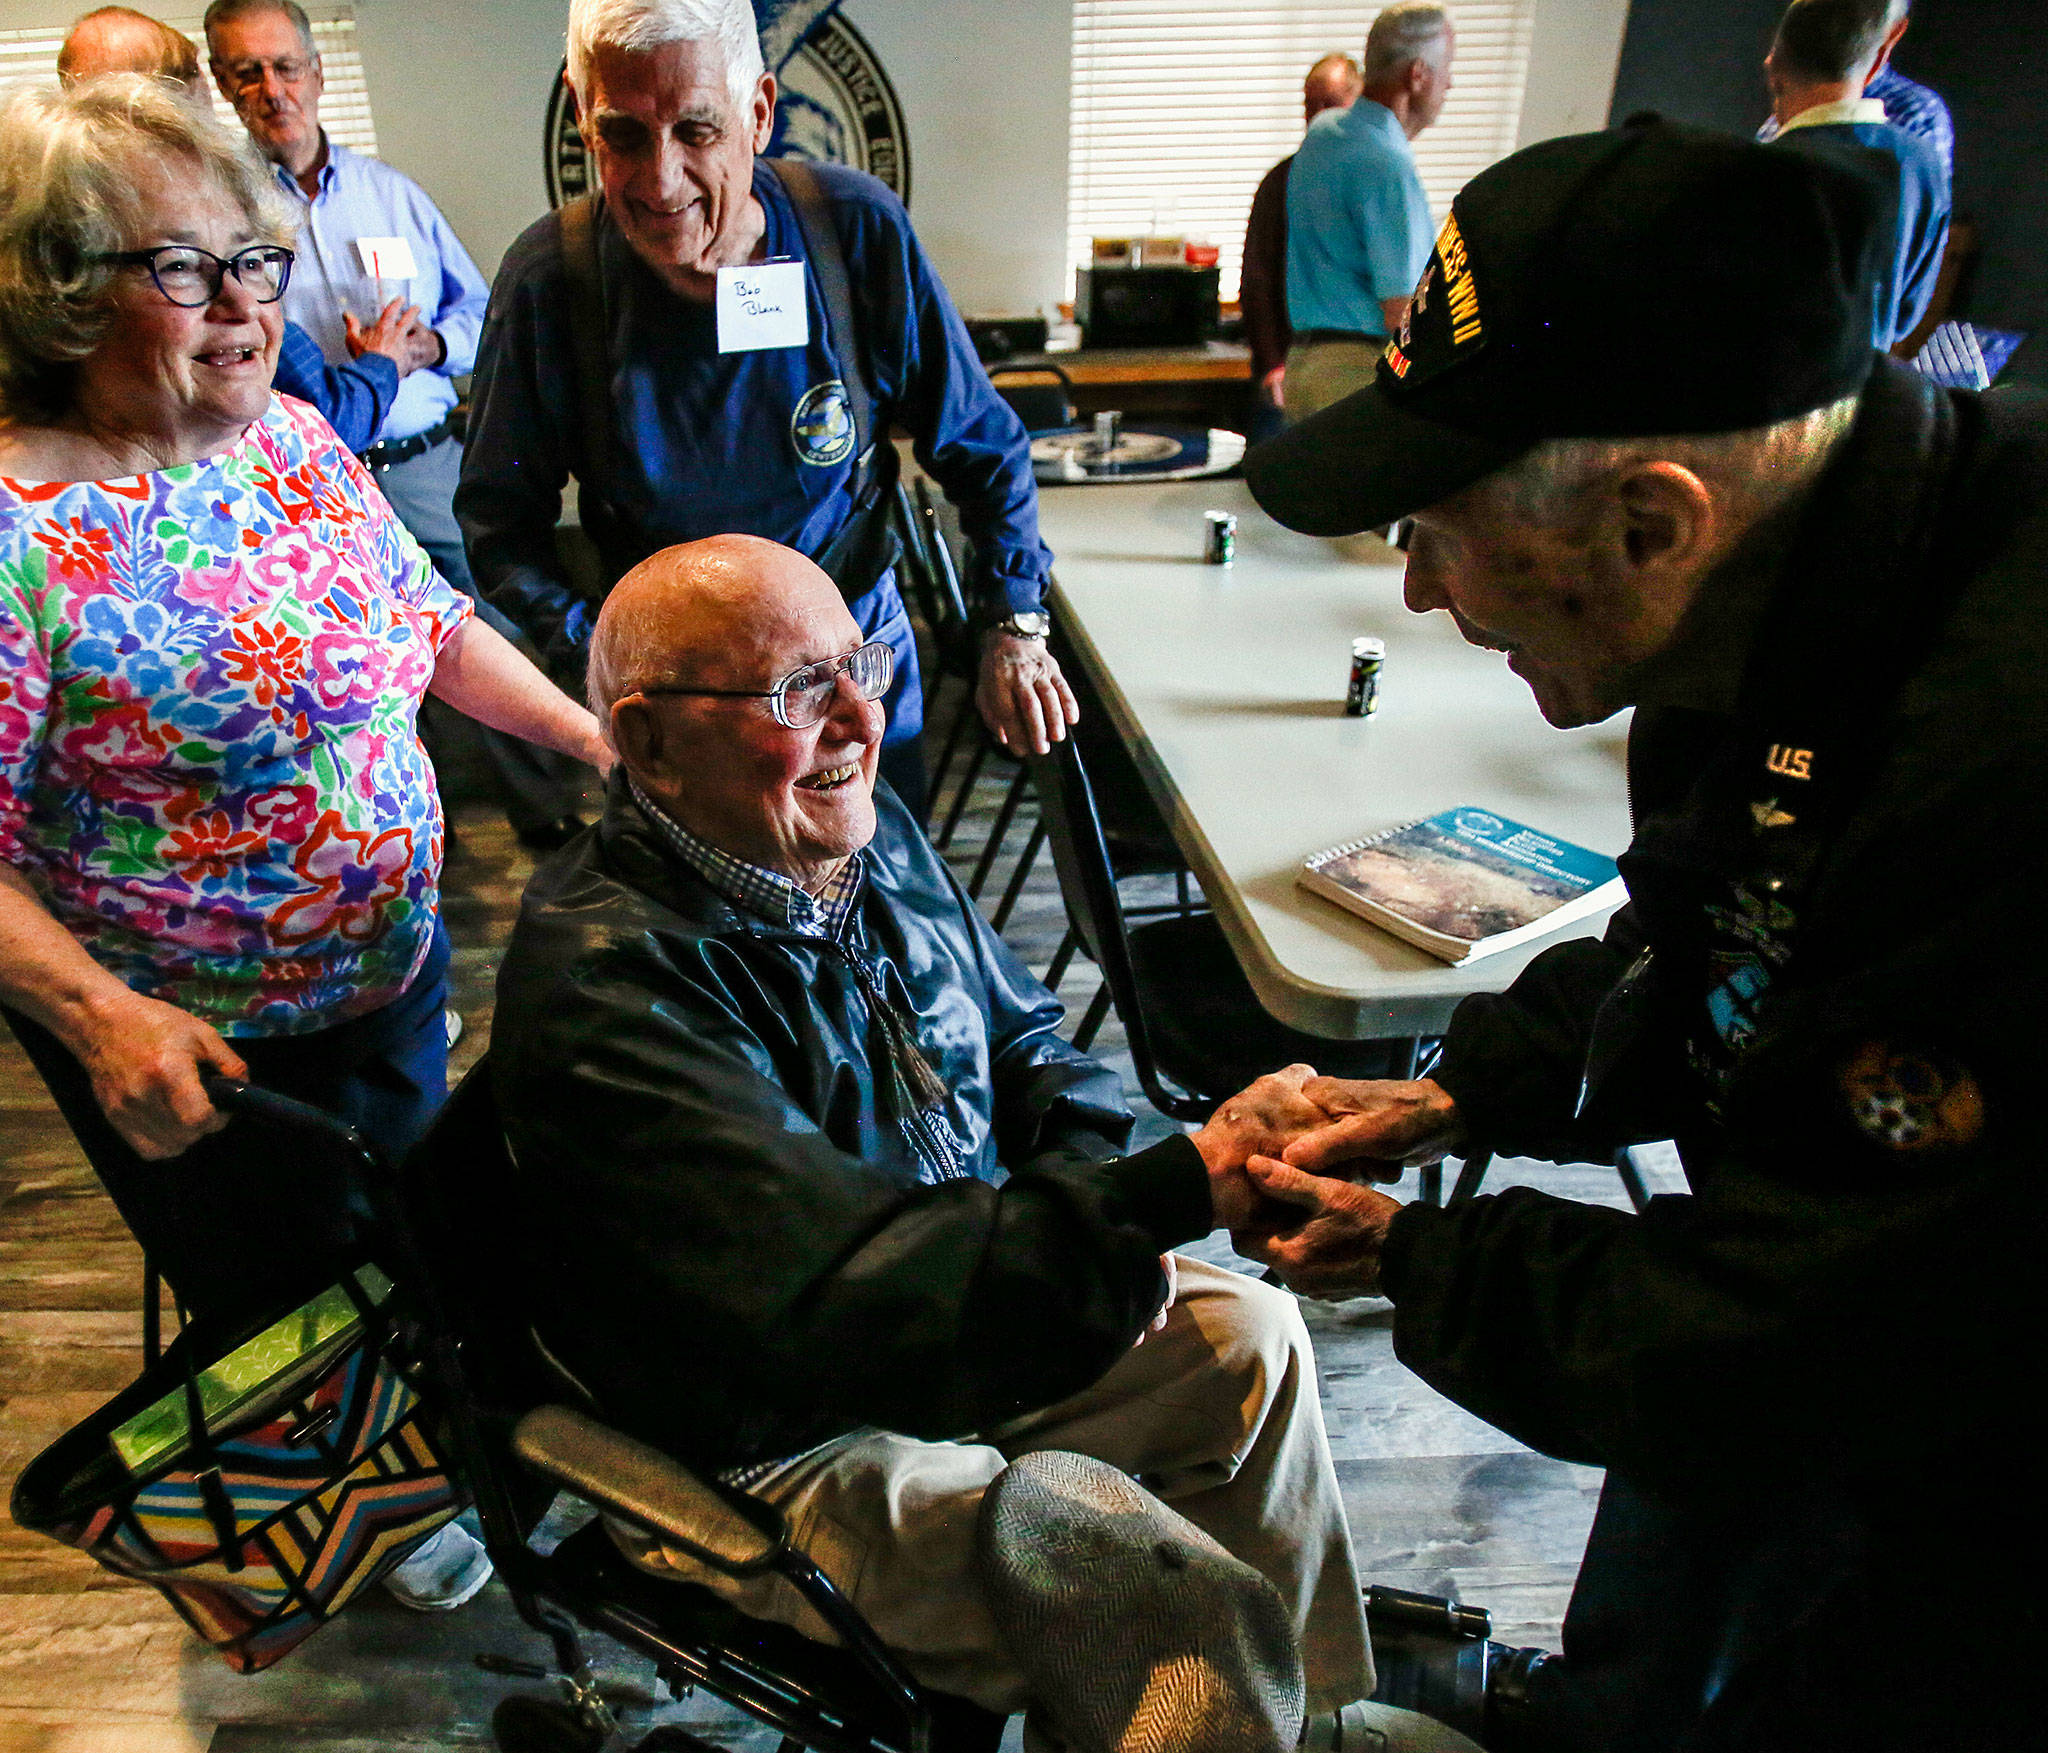 Dick Nelms, 95, enthusiastically shakes hands with Bob Jones, also in his 90s, upon meeting at the Stanwood Eagles on Thursday. More than 20 former military pilots gathered to hear Nelms speak of flying 35 combat missions in a B-17 during World War II. (Dan Bates / The Herald)